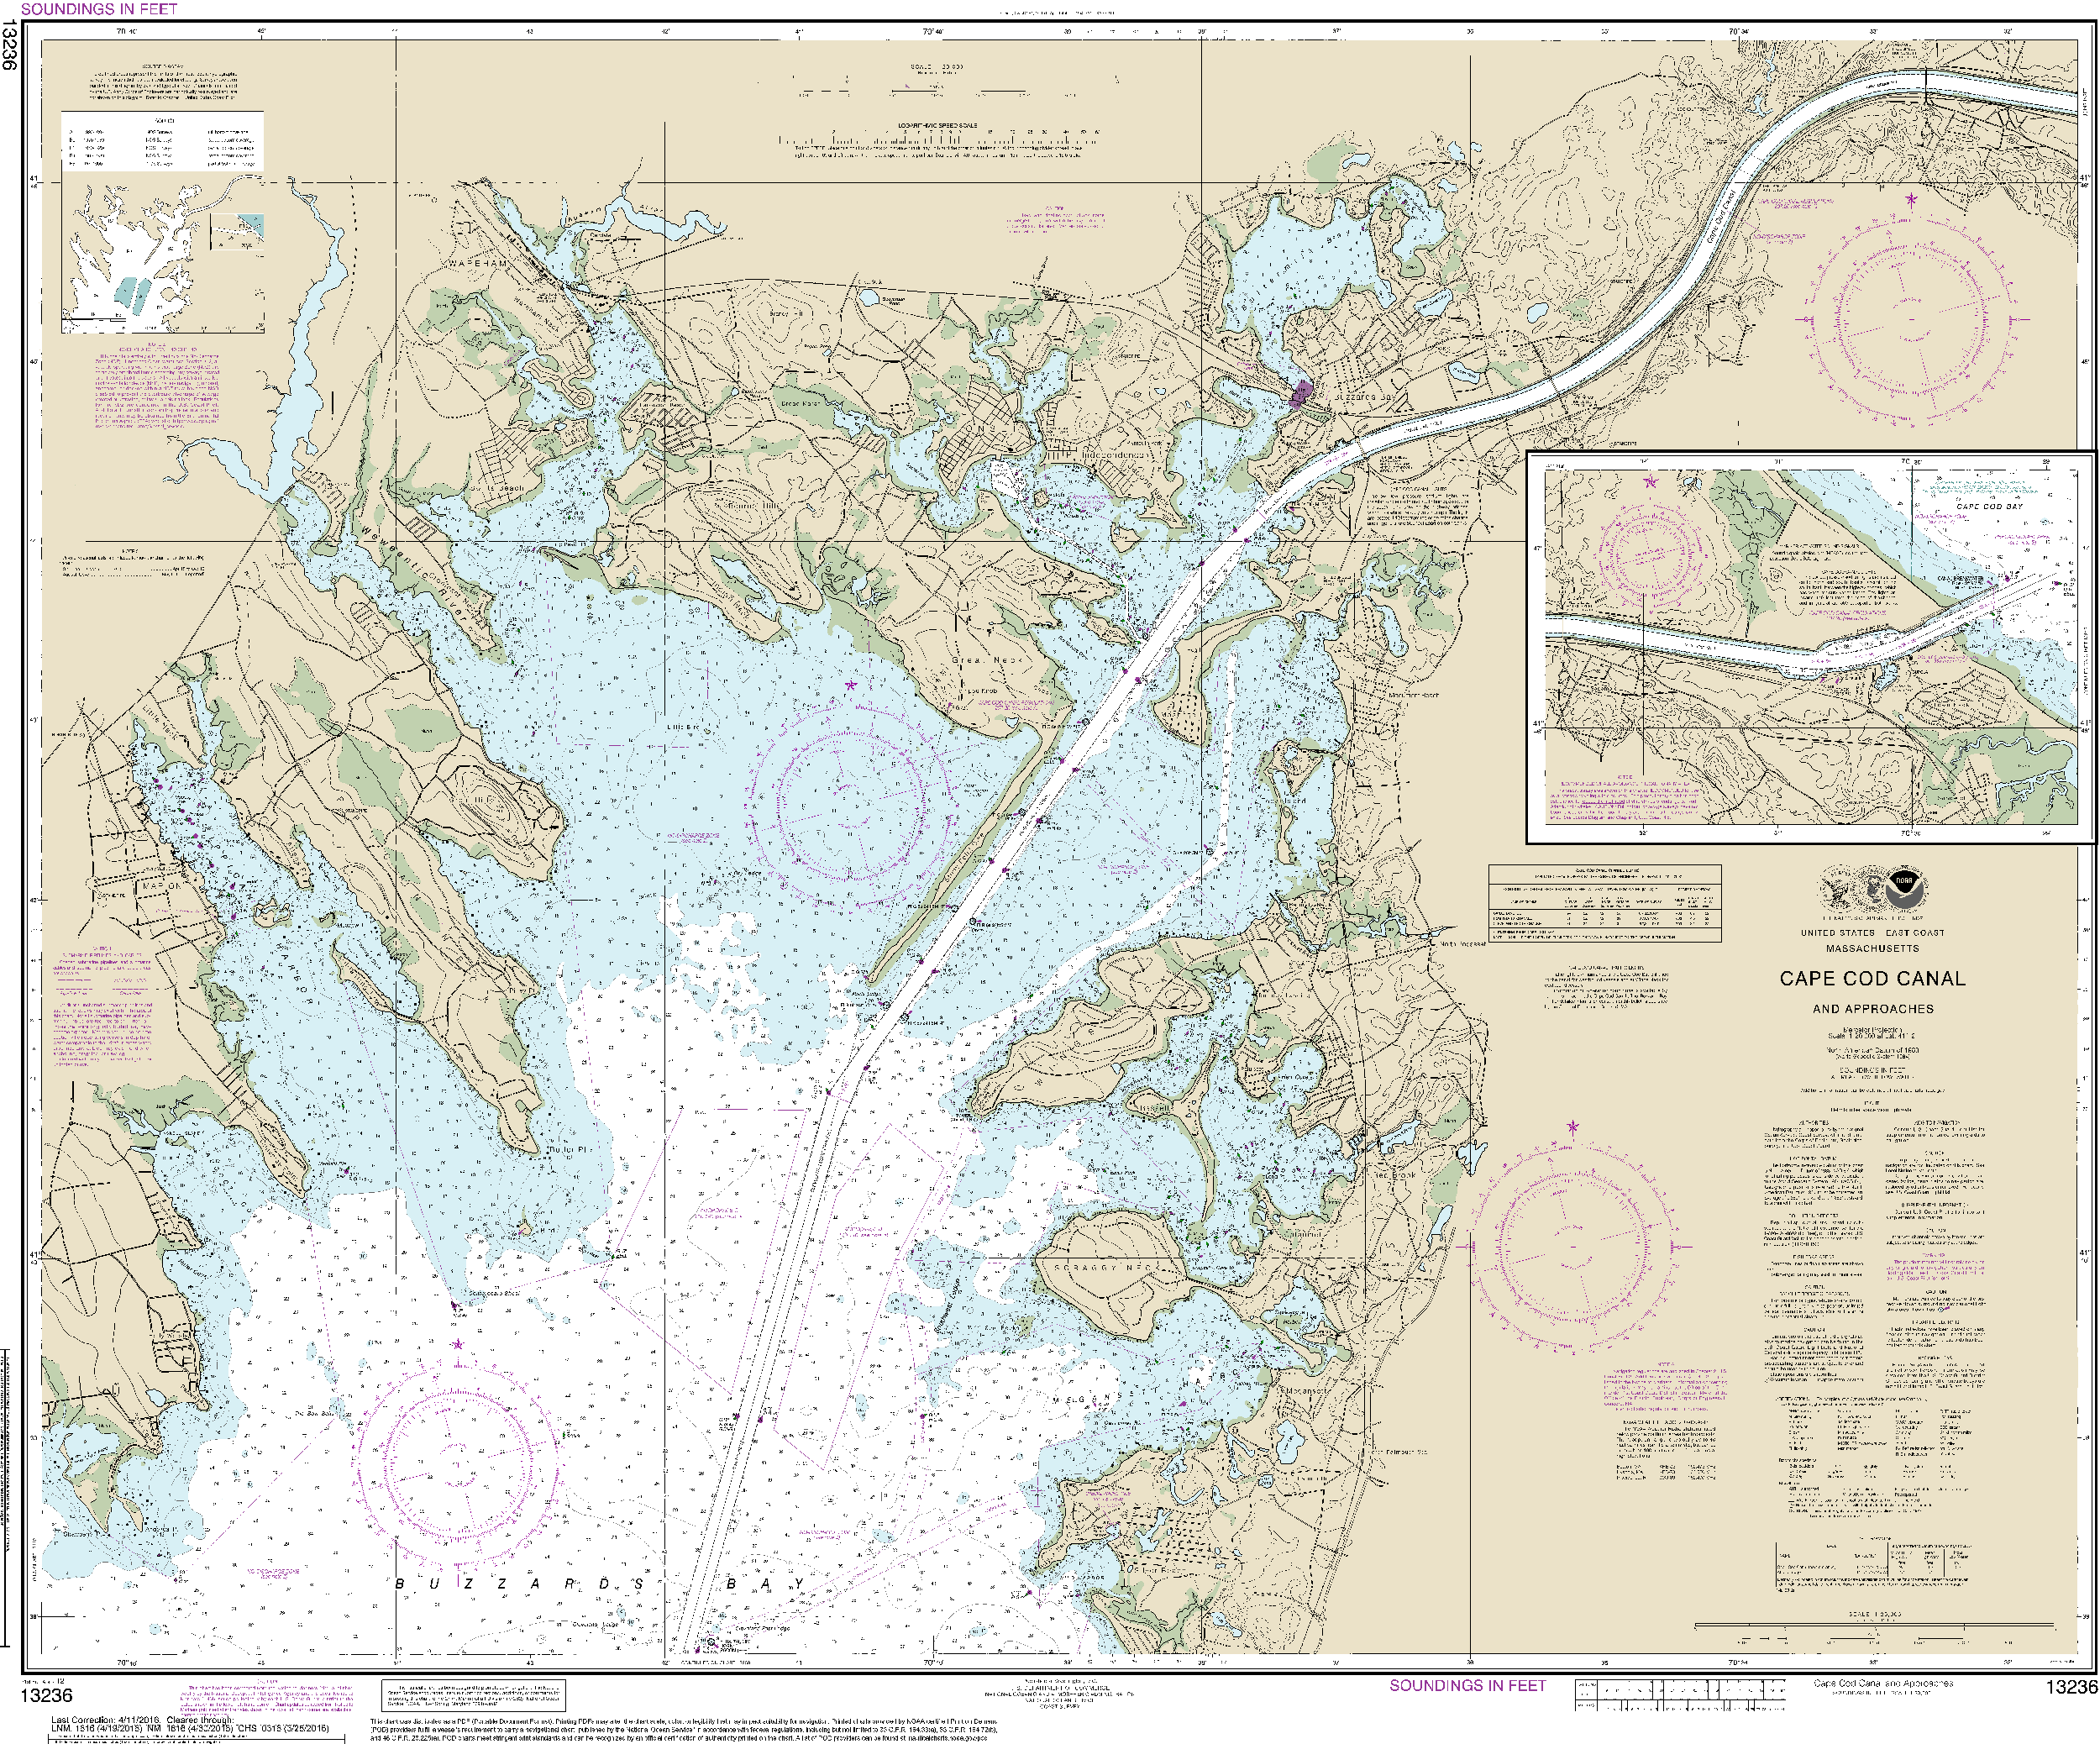 NOAA Nautical Chart 13236: Cape Cod Canal and Approaches